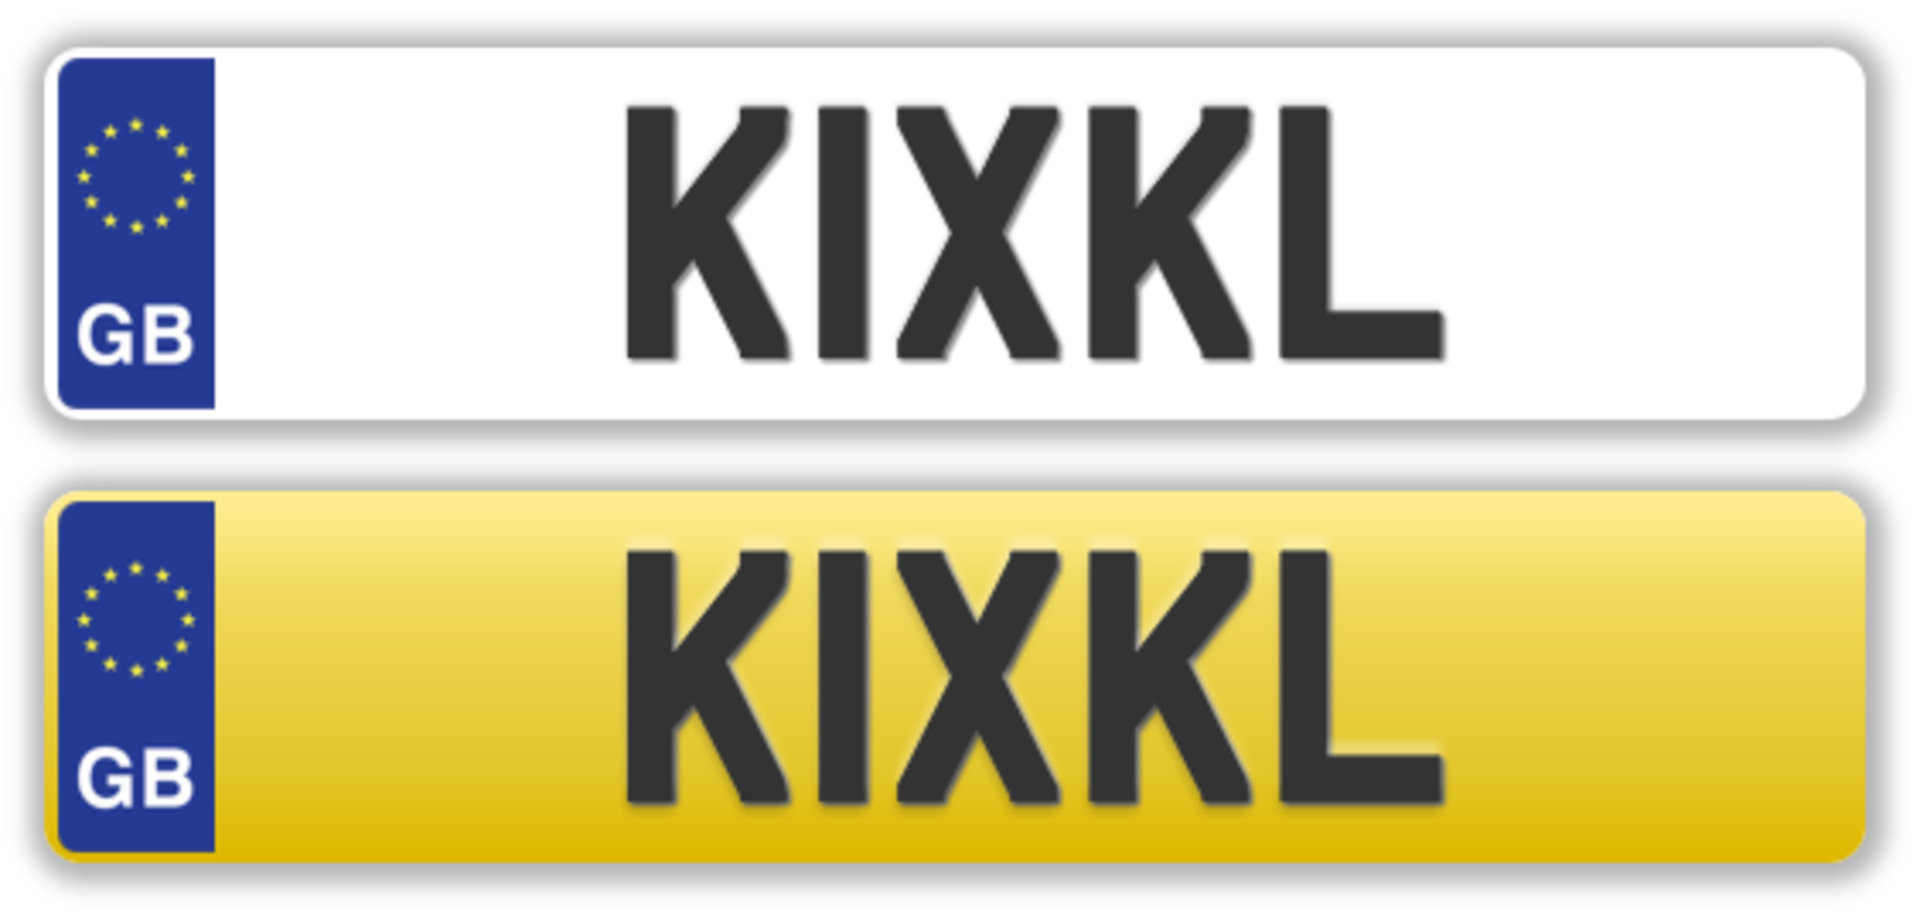 Cherished Plate - K1 XKL - No transfer fees. All registrations on retention and ready to transfer.